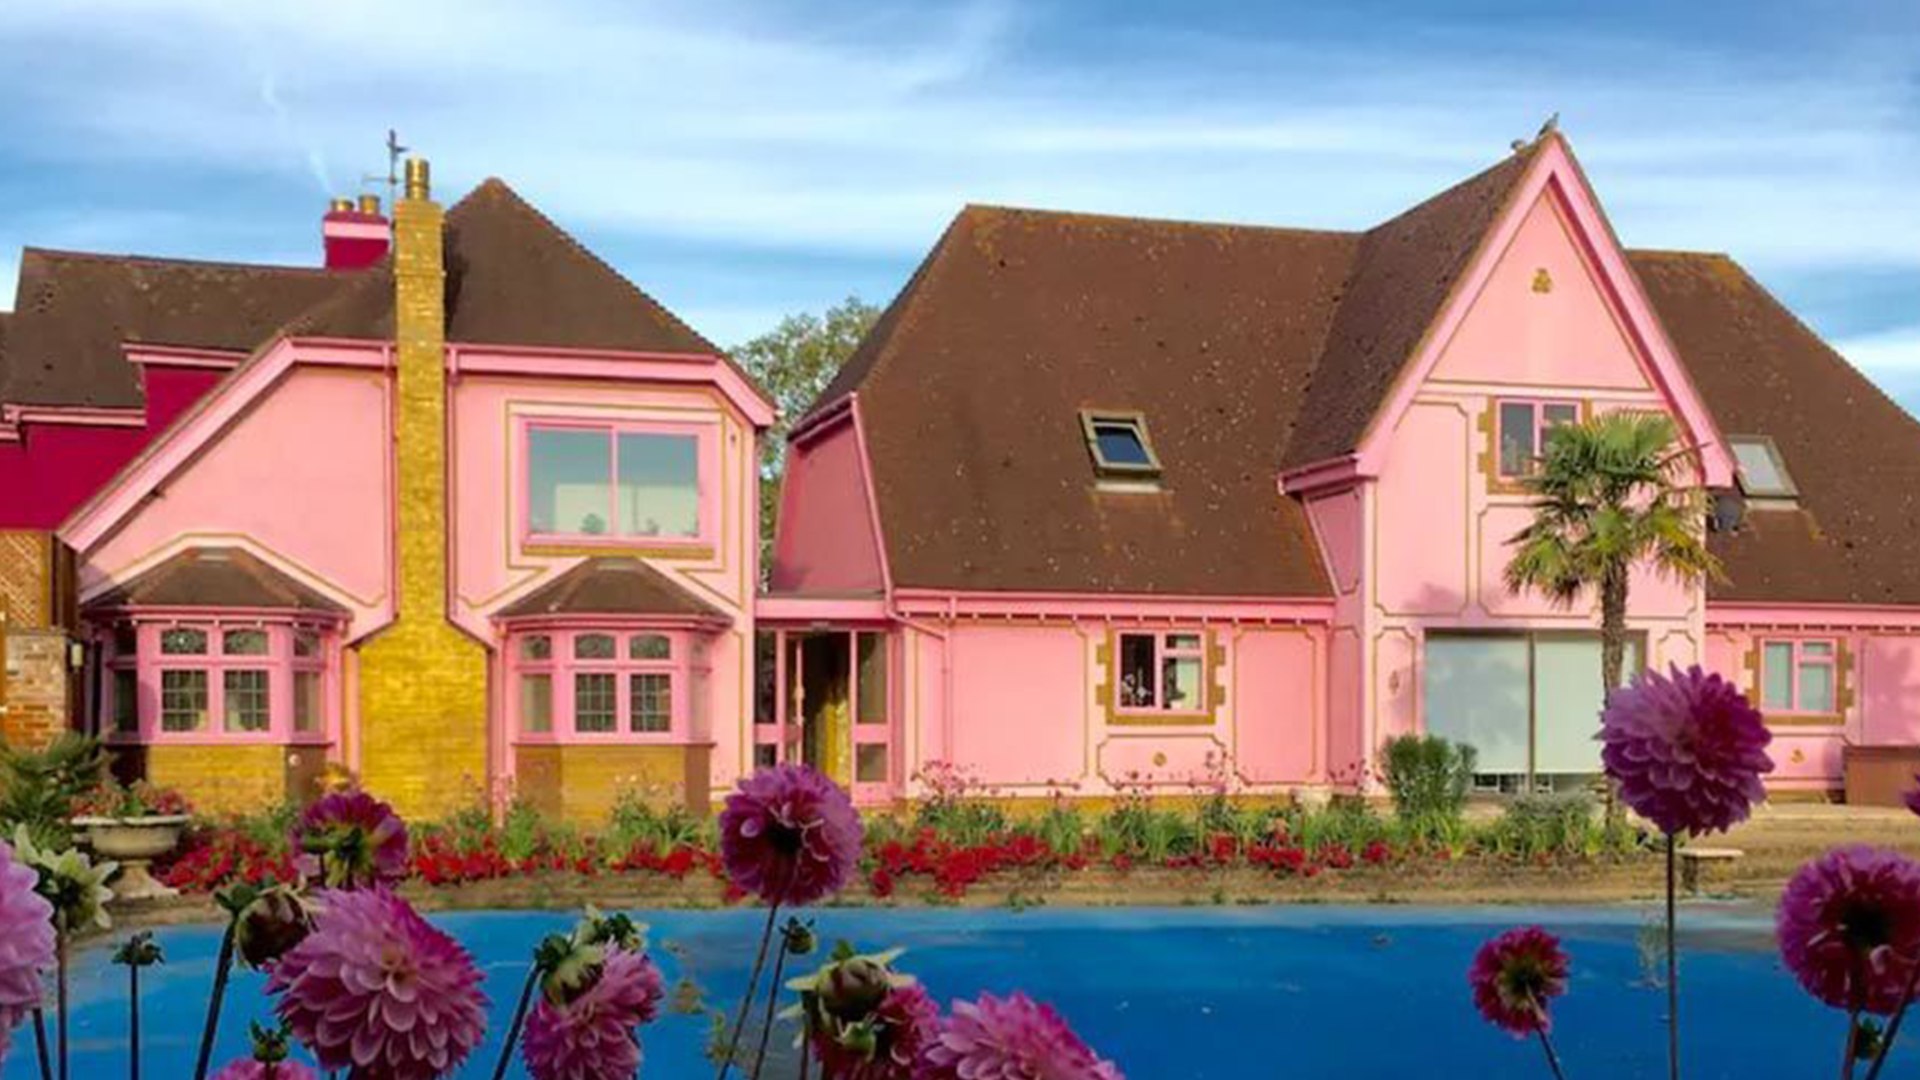 This Real-Life Barbie Dream House Is a Literal Dream Come True - video  Dailymotion